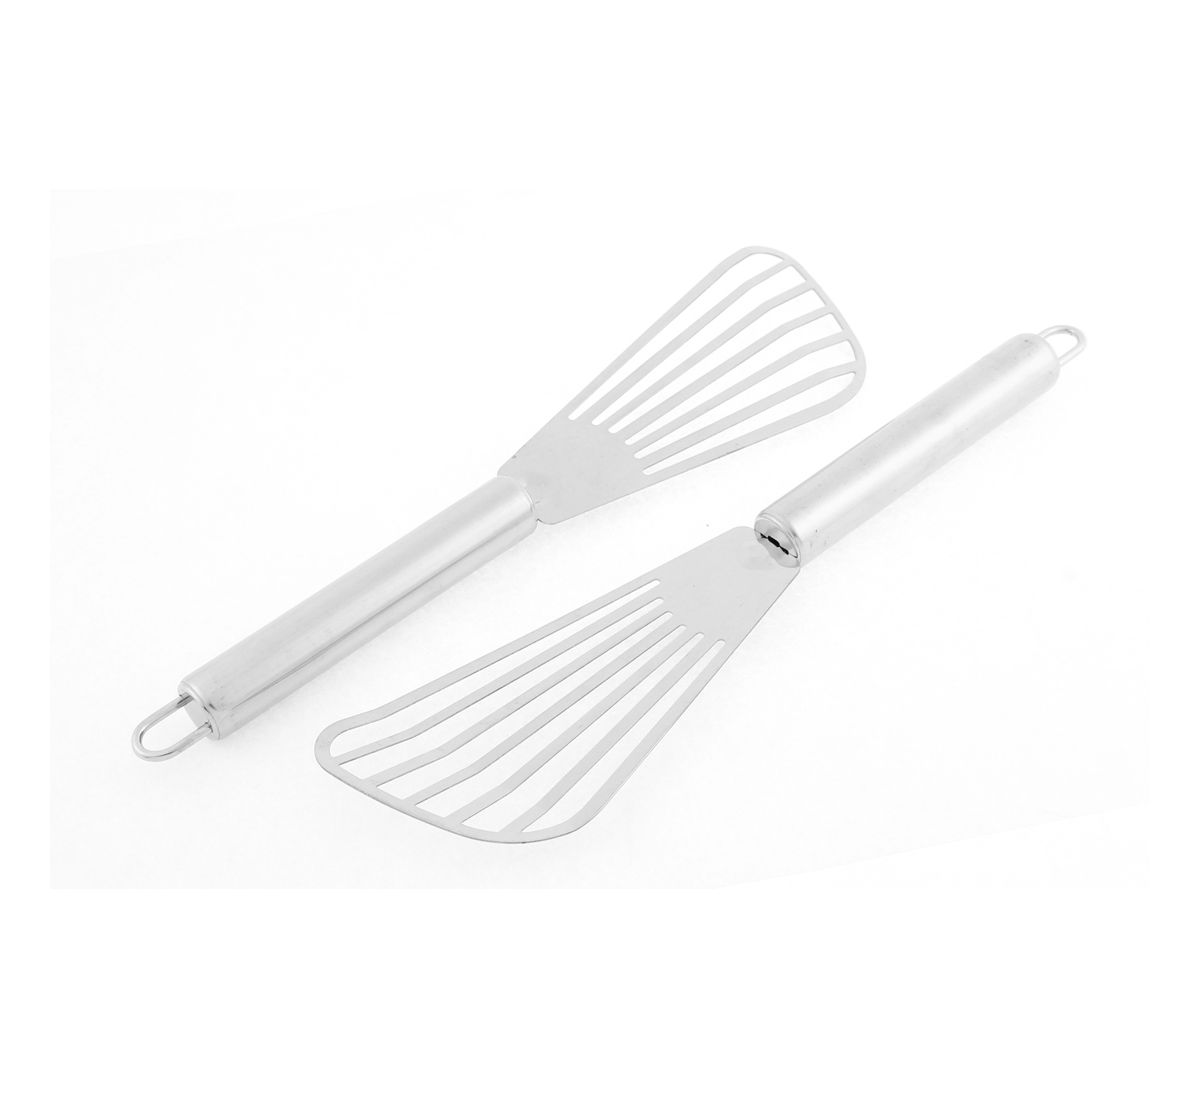 2pcs Stainless Steel Cooking Spatula Frying Fish Slotted Pancake Turner Unique Bargains